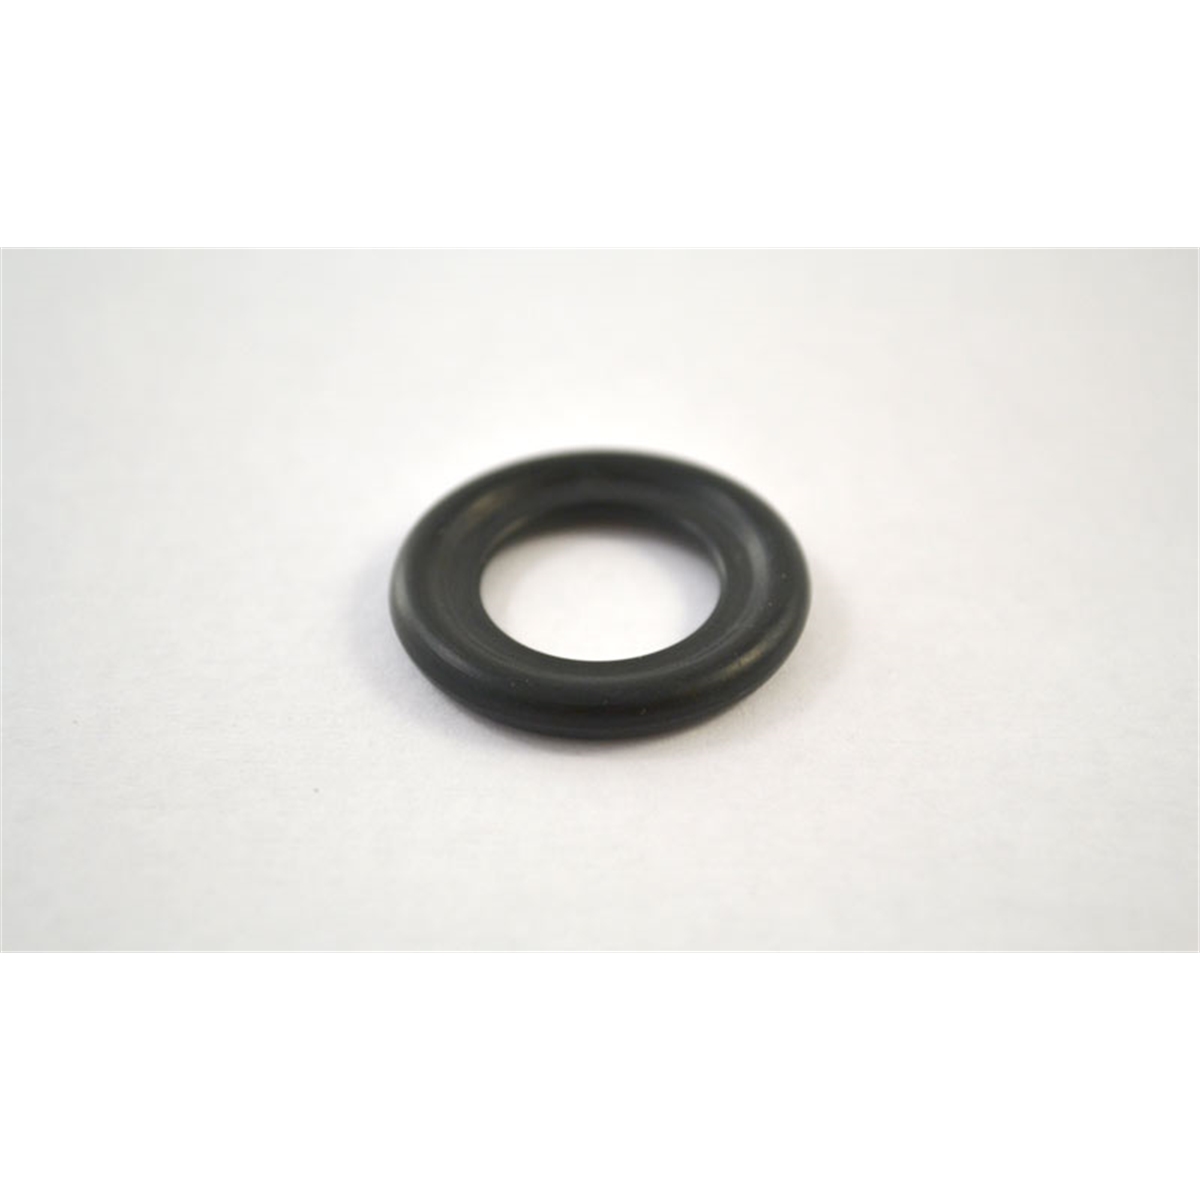 14mm Rubber Replacement Gasket for Oil Drain 100...